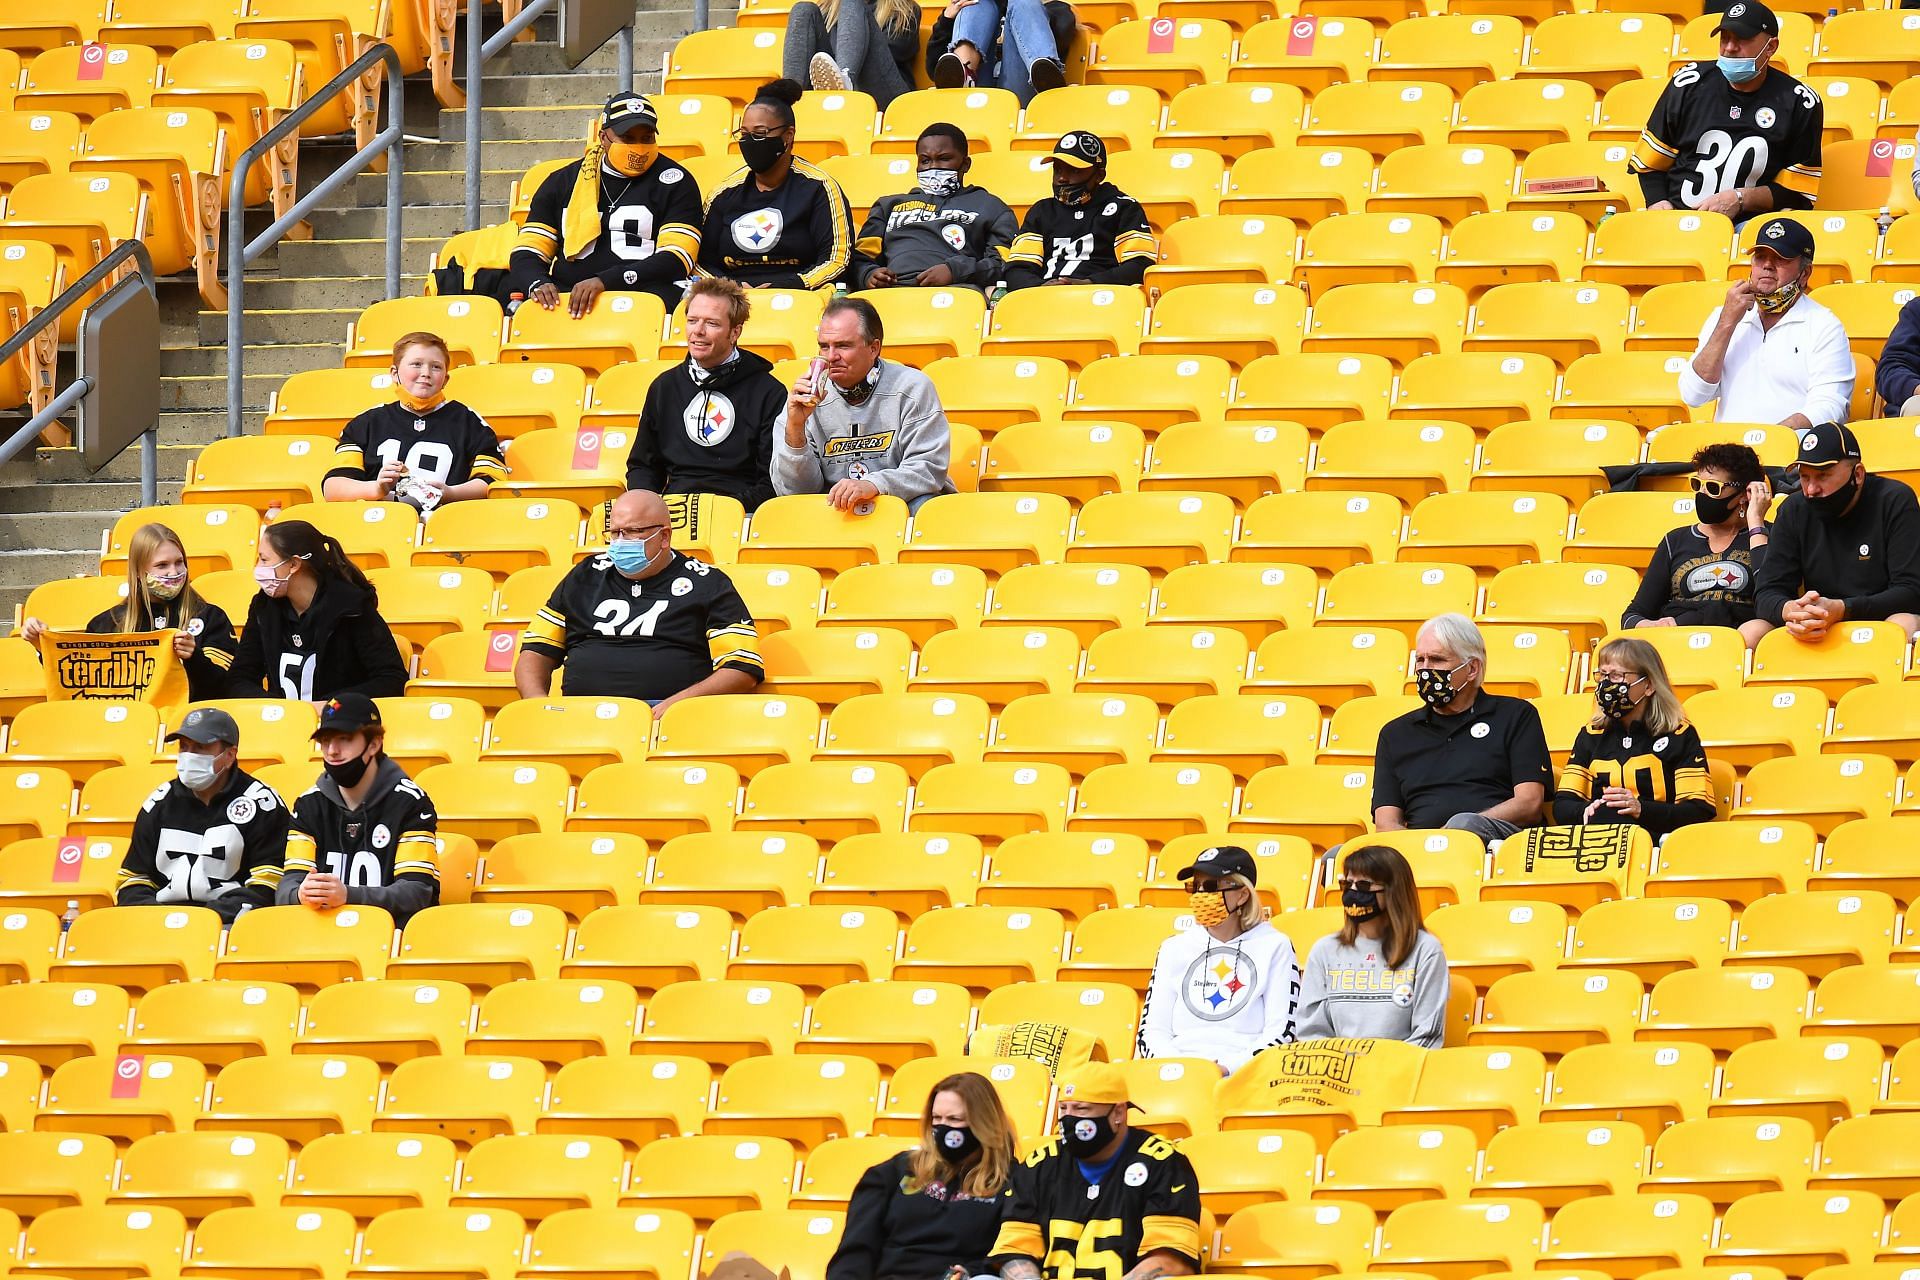 Heinz Field will now be known as Acrisure Stadium